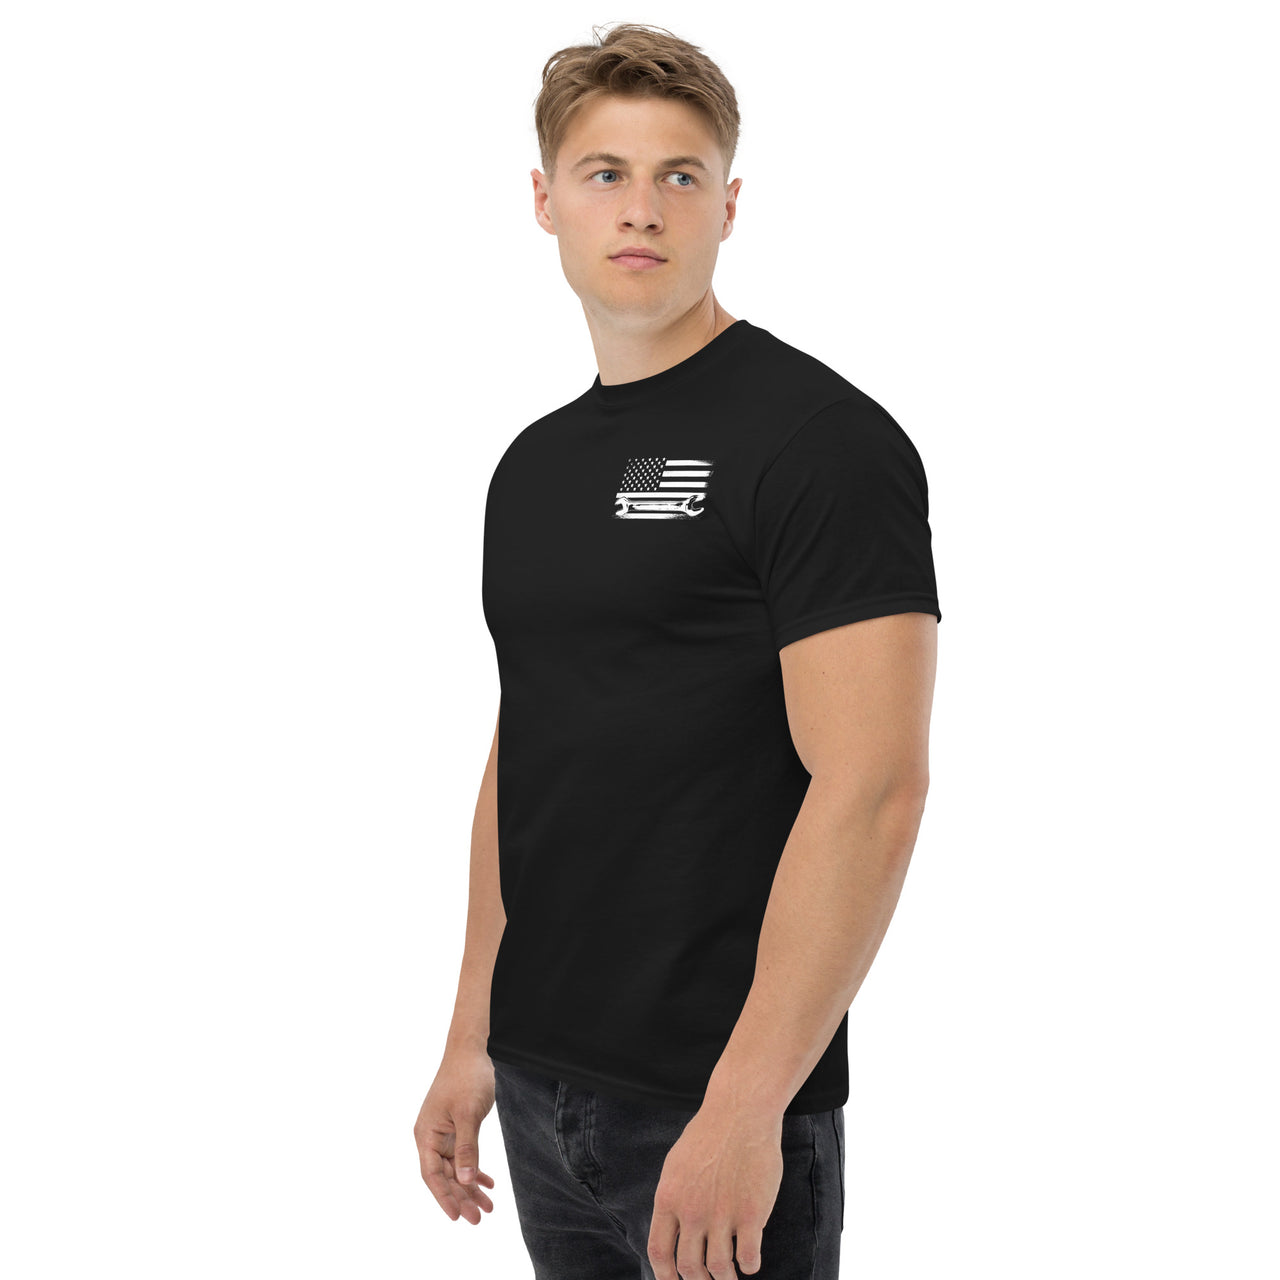 Mechanic T-Shirt - I Fix What You Cant modeled in black